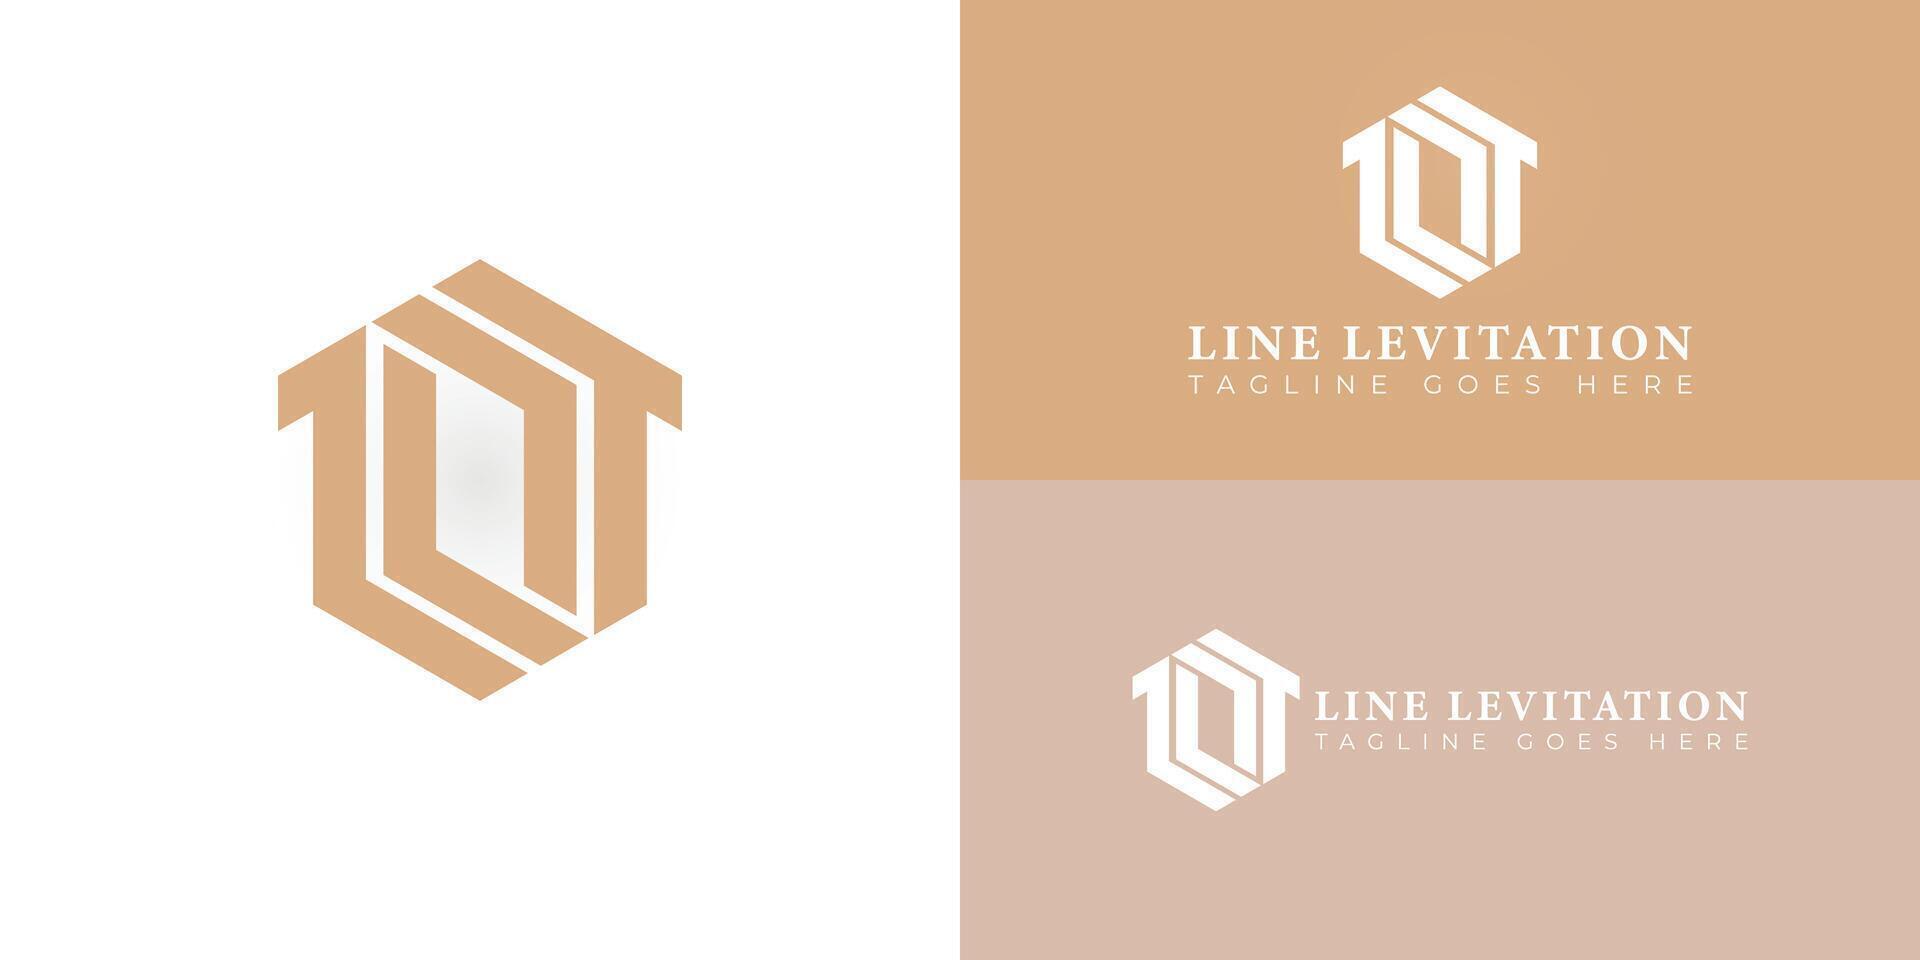 Abstract initial letter LL mirror, minimalist line art hexagon shape logo presented with multiple background colors. The logo is suitable for real estate property company logo design inspiration vector